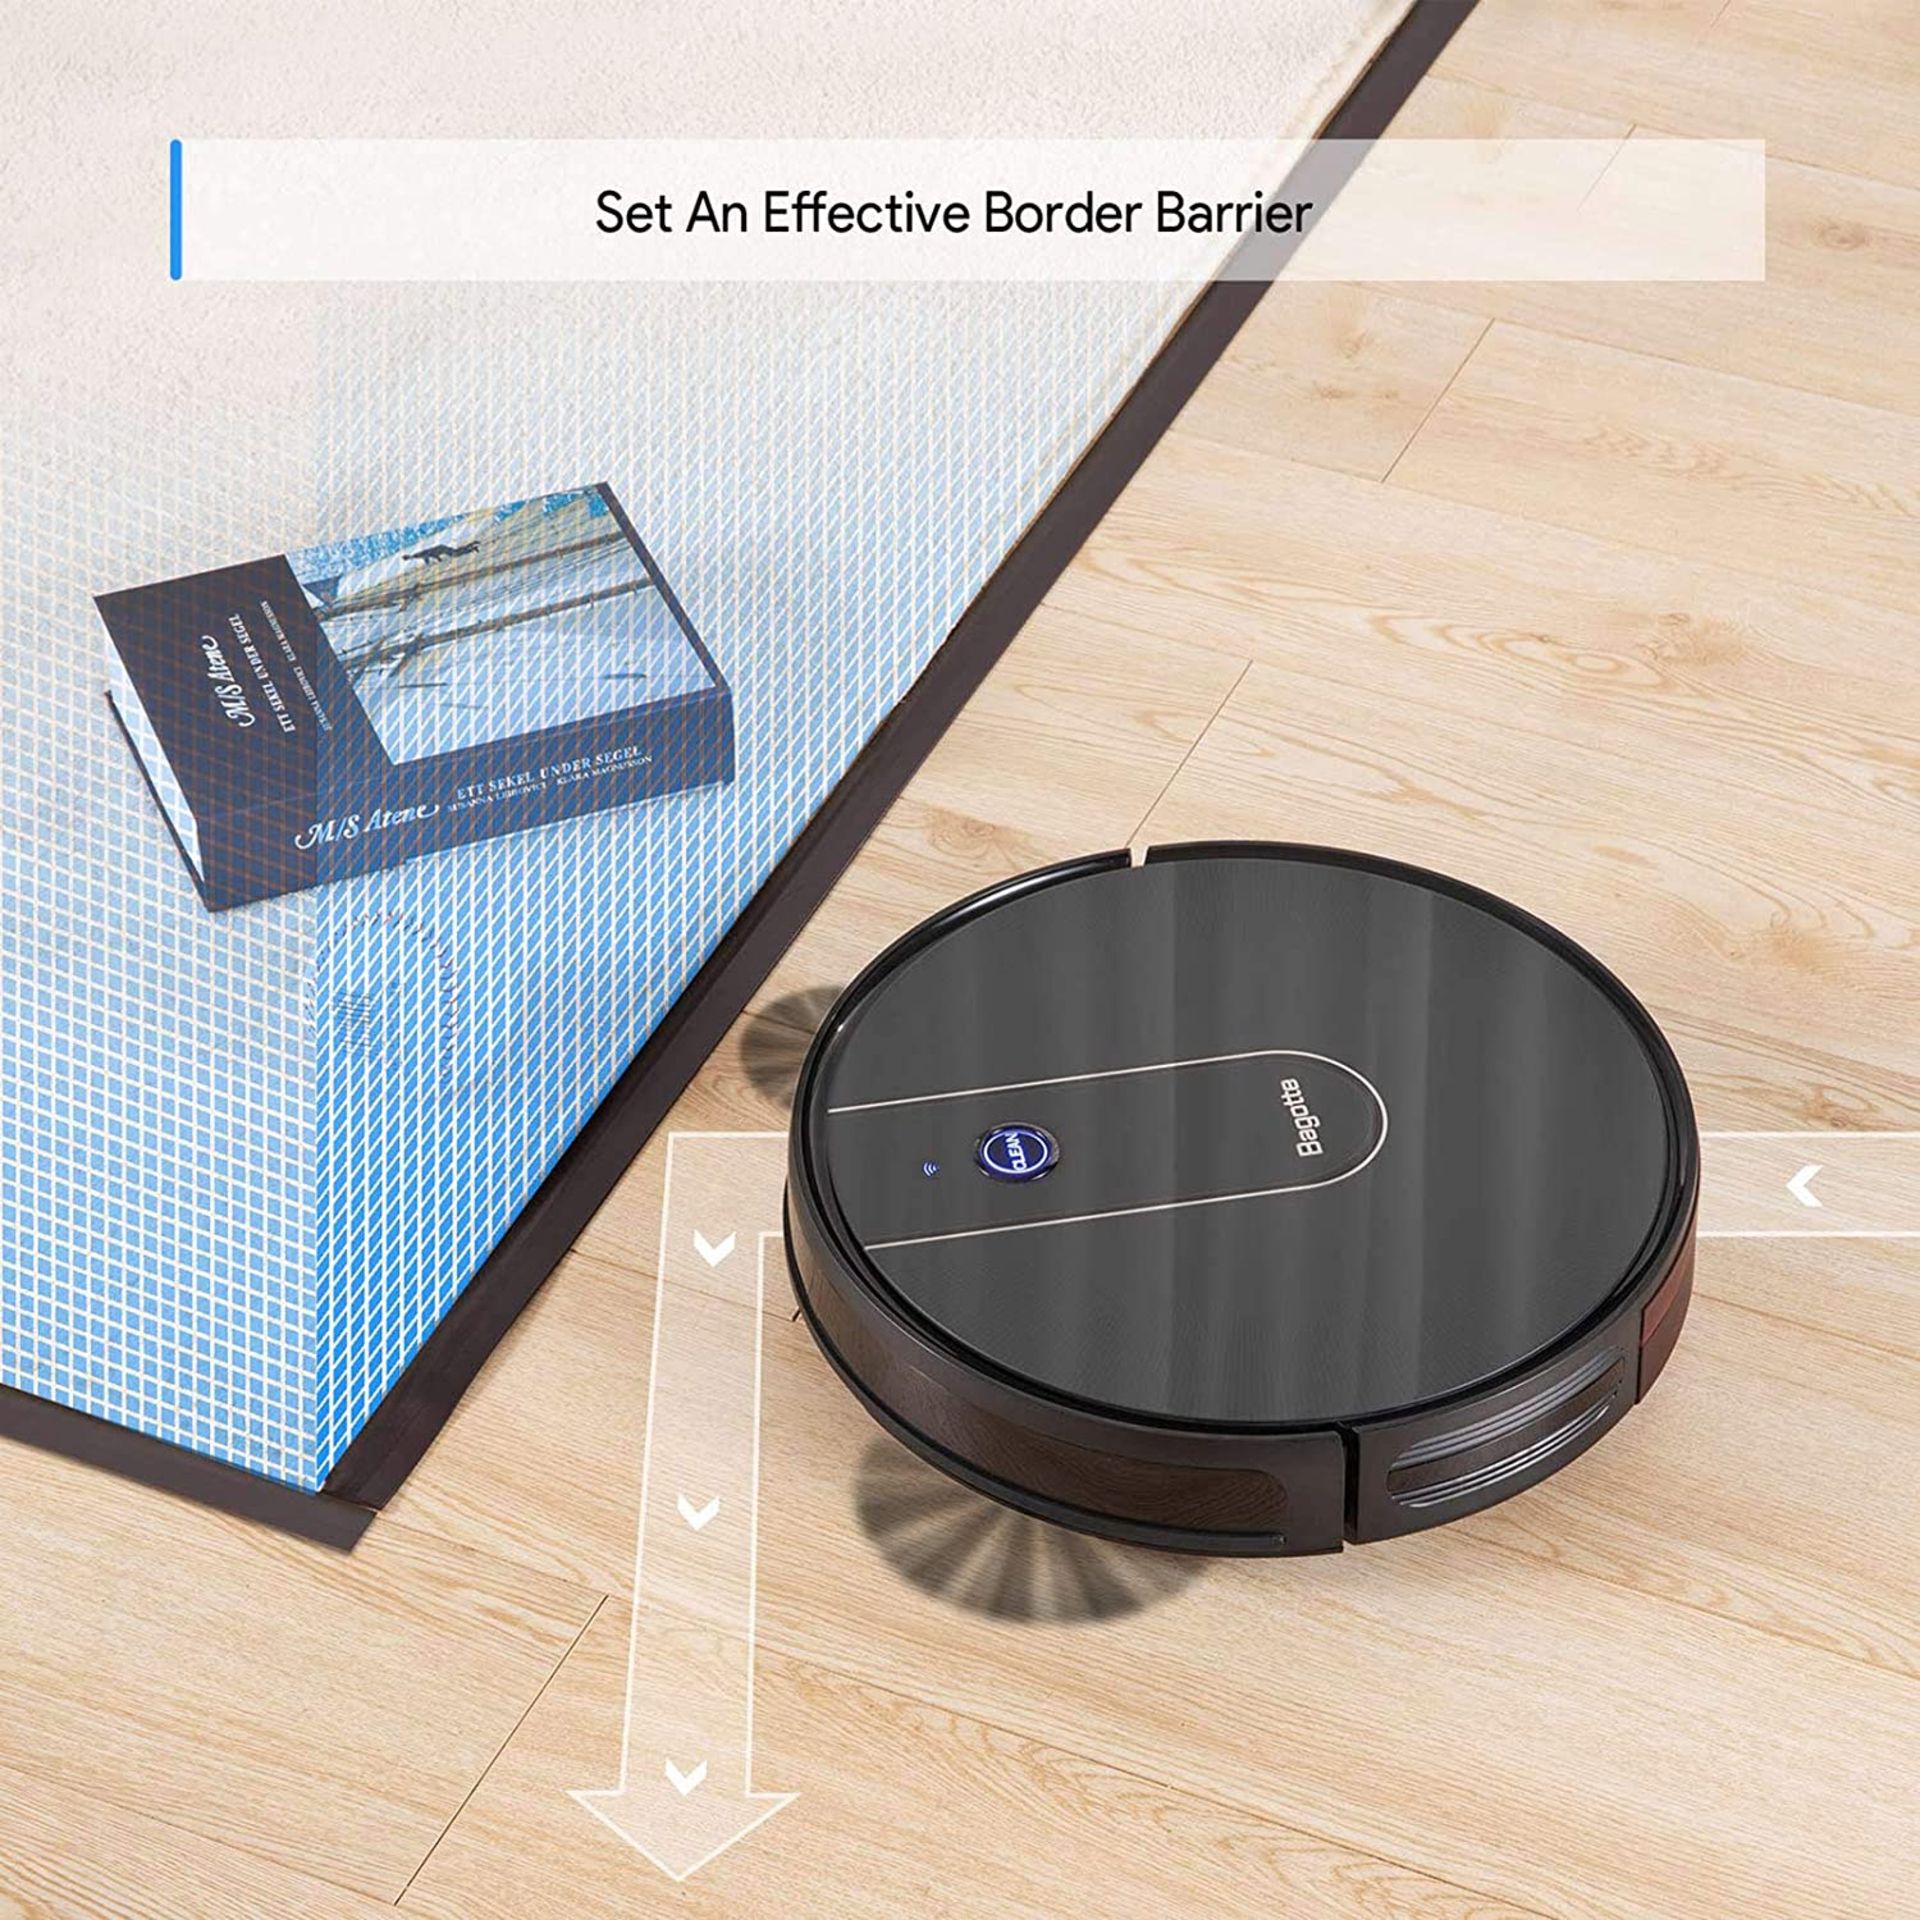 Bagotte BG700 Wi-Fi Robot Vacuum with mop - 2.7" Thin, Strong Suction, Work with Alexa - Image 3 of 8